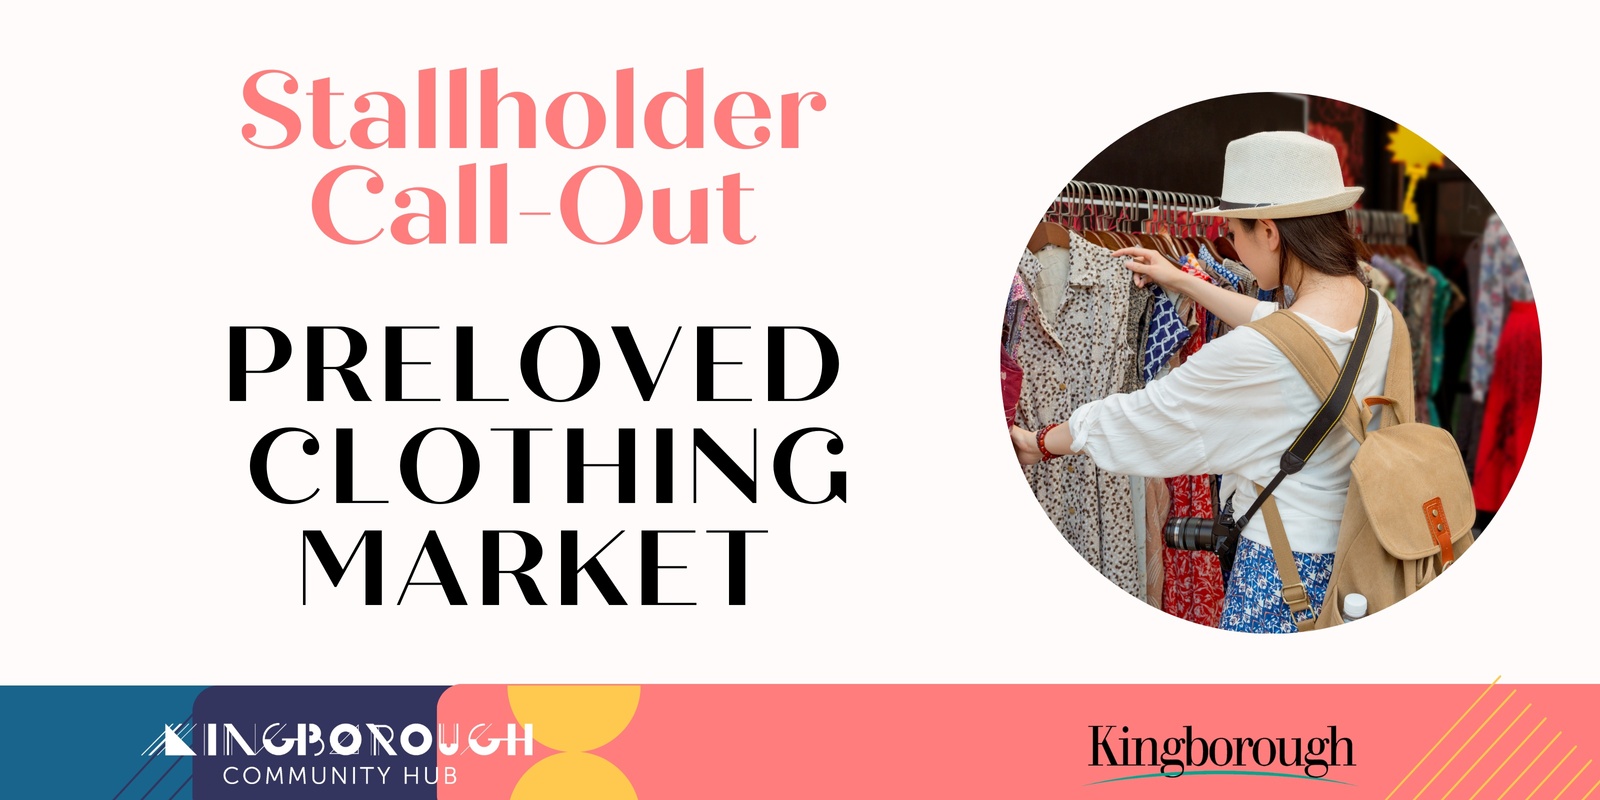 Banner image for Pre-loved clothing market at the Kingborough Community Hub - stallholders call-out 